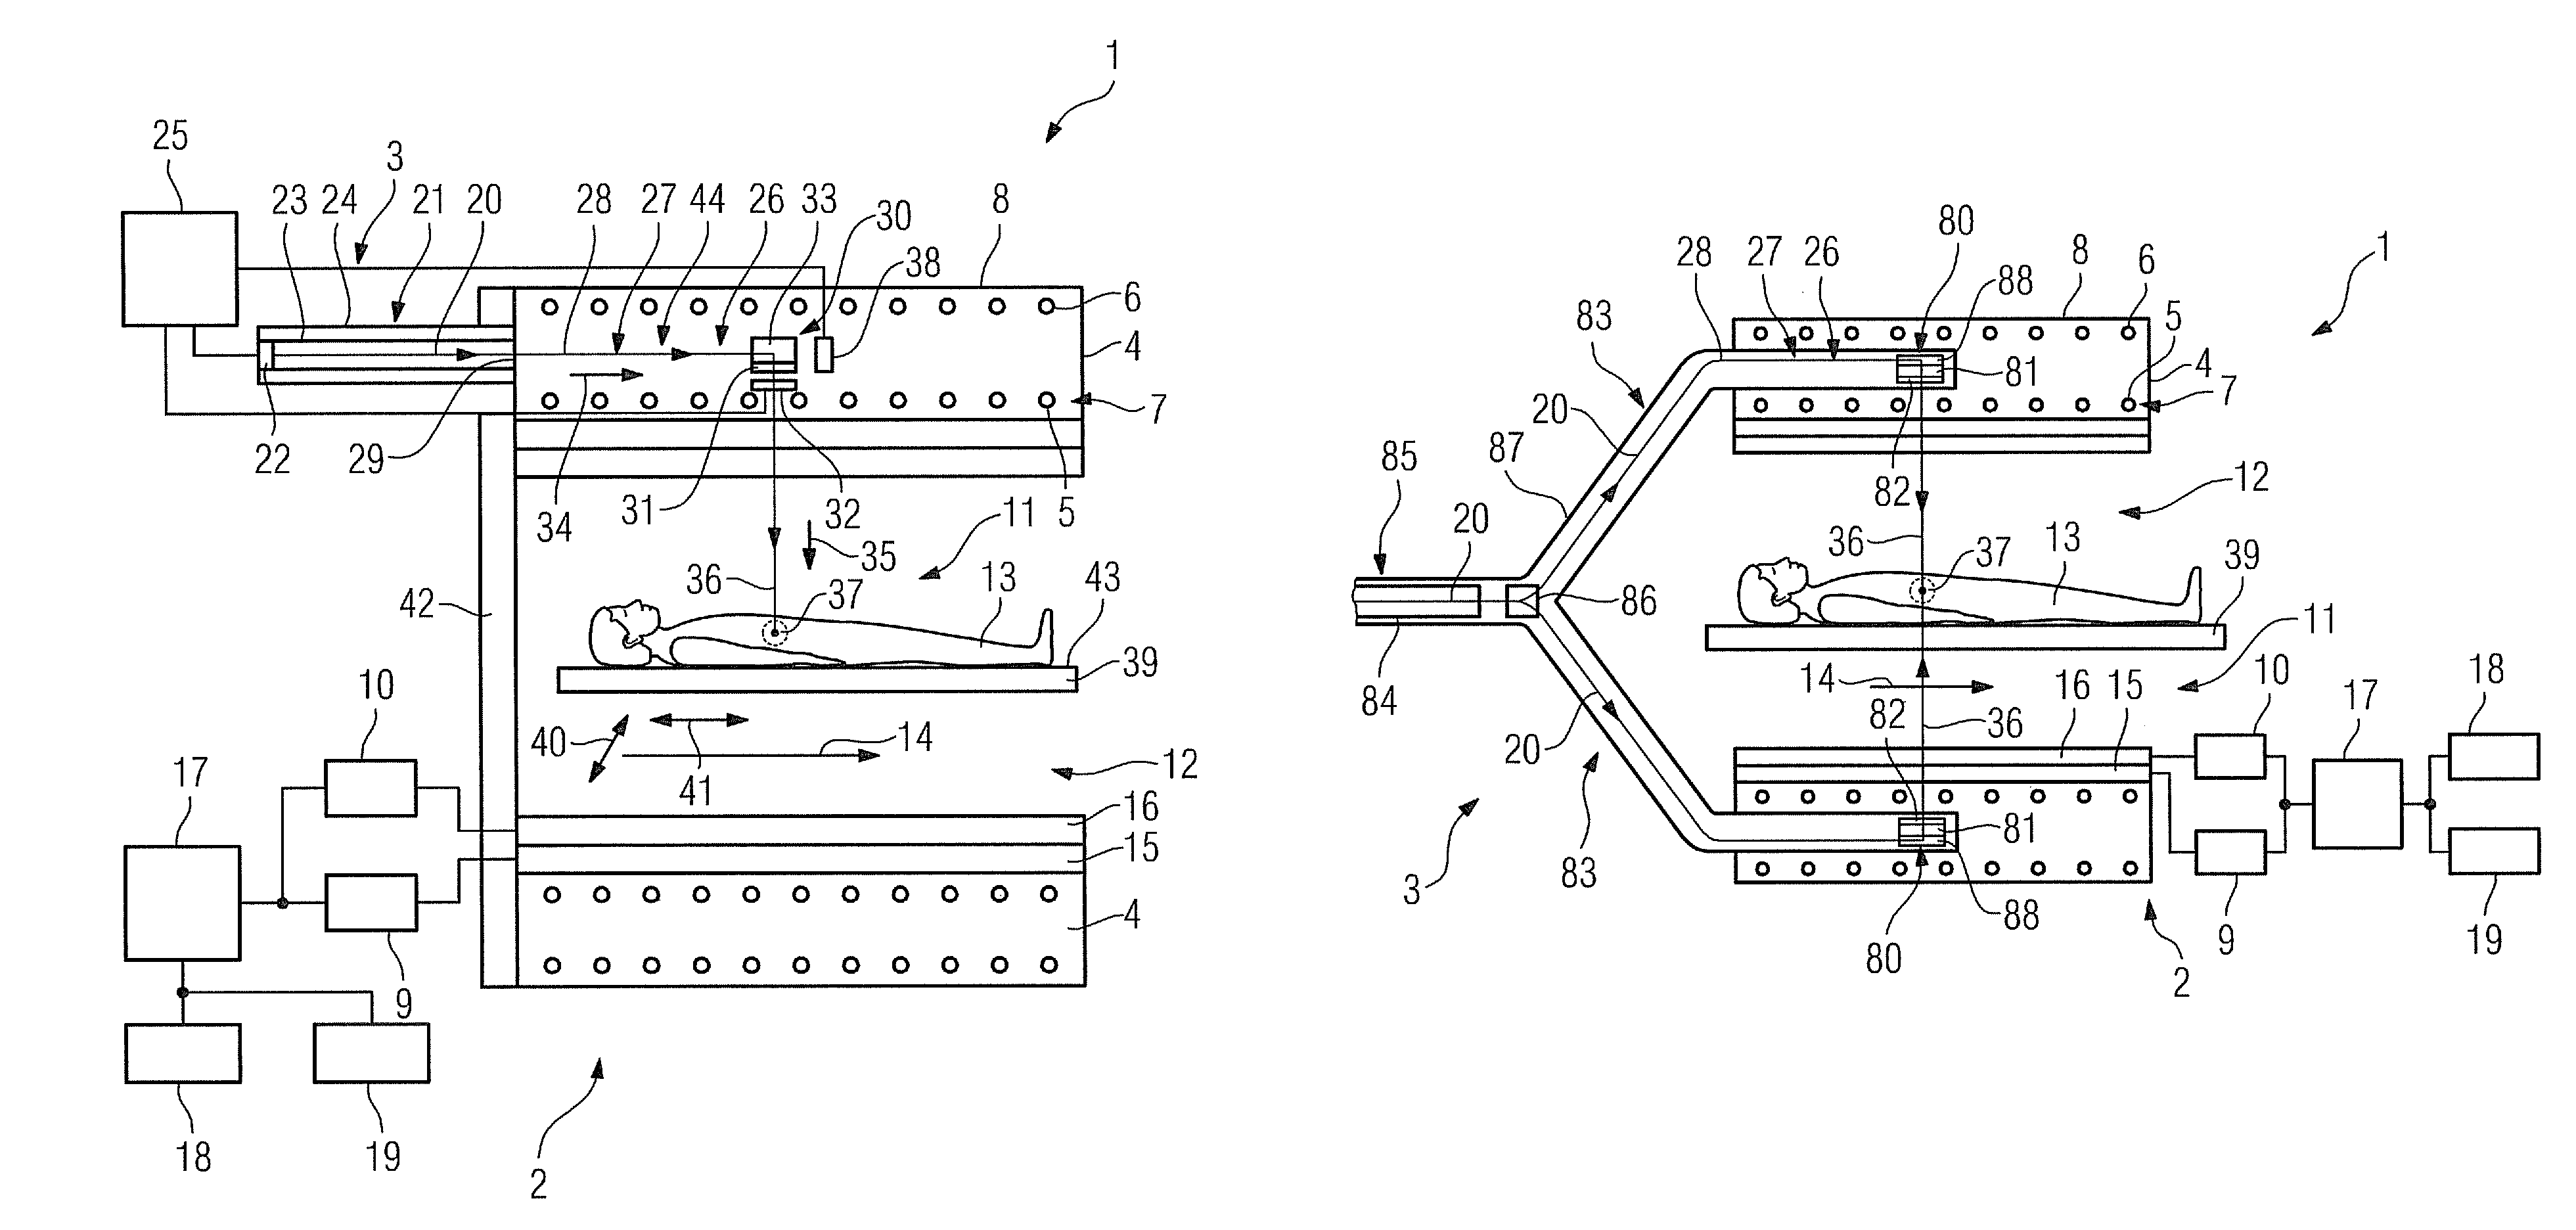 Apparatus having a combined magnetic resonance apparatus and radiation therapy apparatus